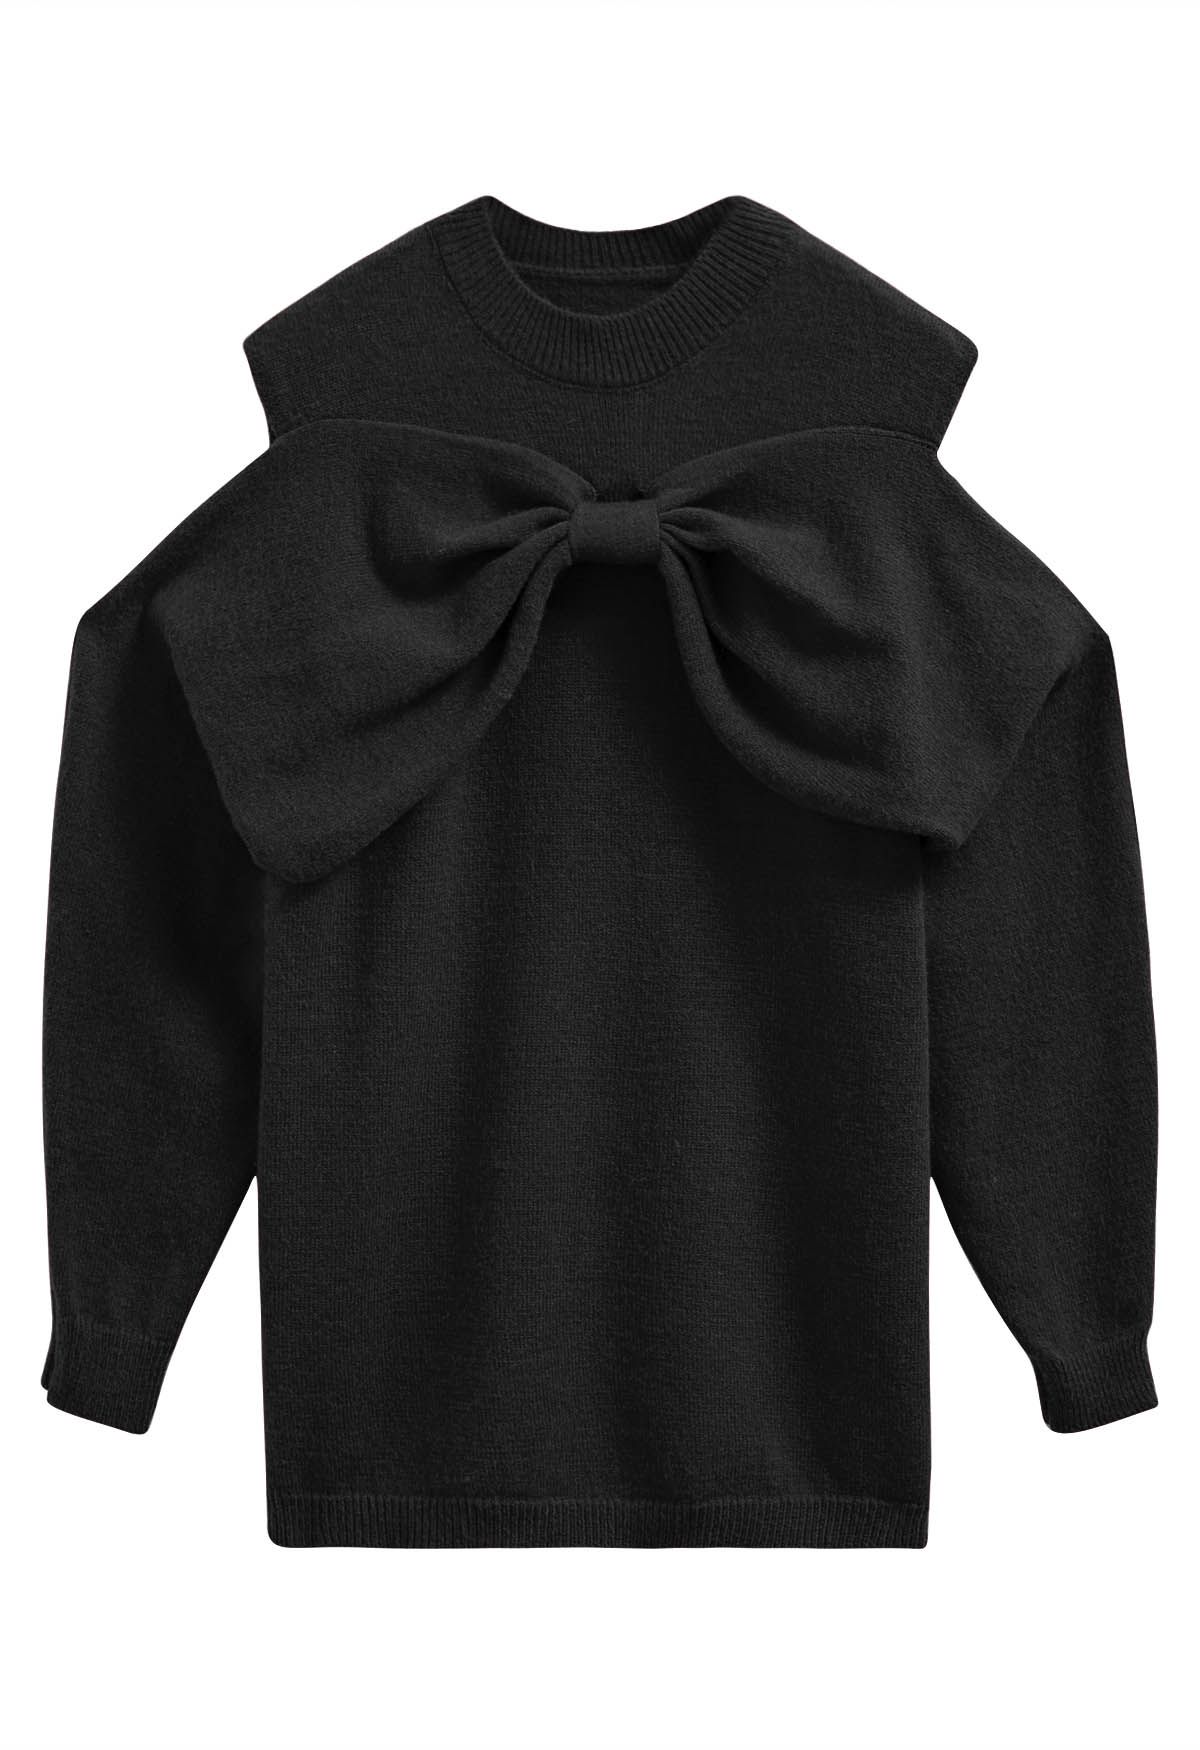 Bowknot Cold-Shoulder Knit Sweater in Black